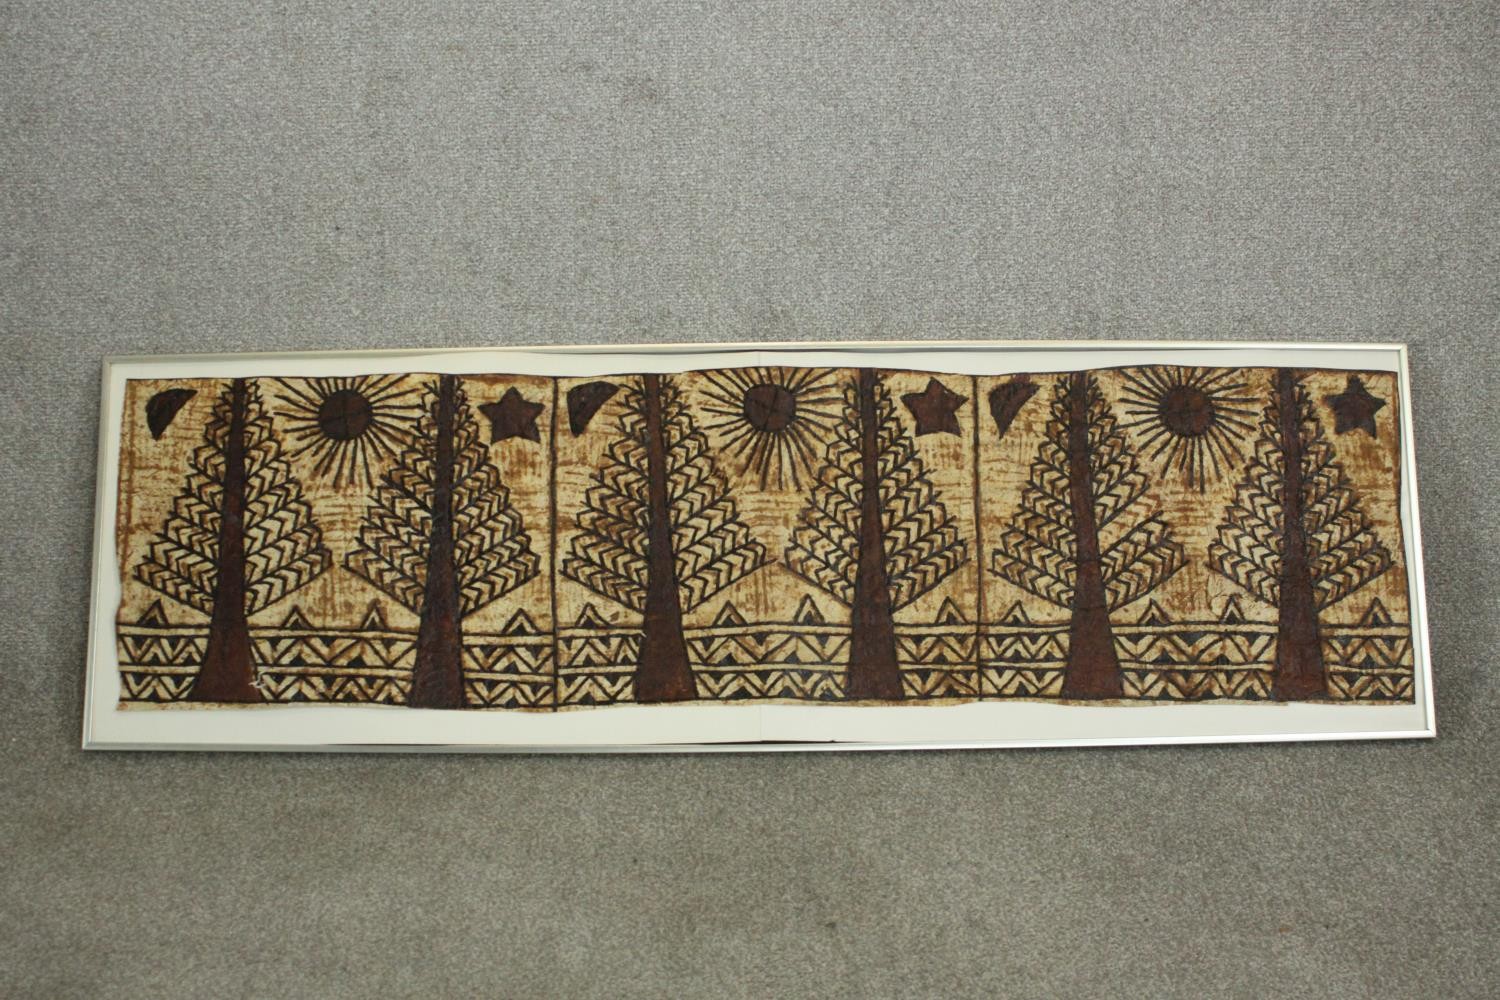 Two large Tonganese Tapa cloth wall hangings, one depicting animals and one depicting stylised trees - Image 7 of 10